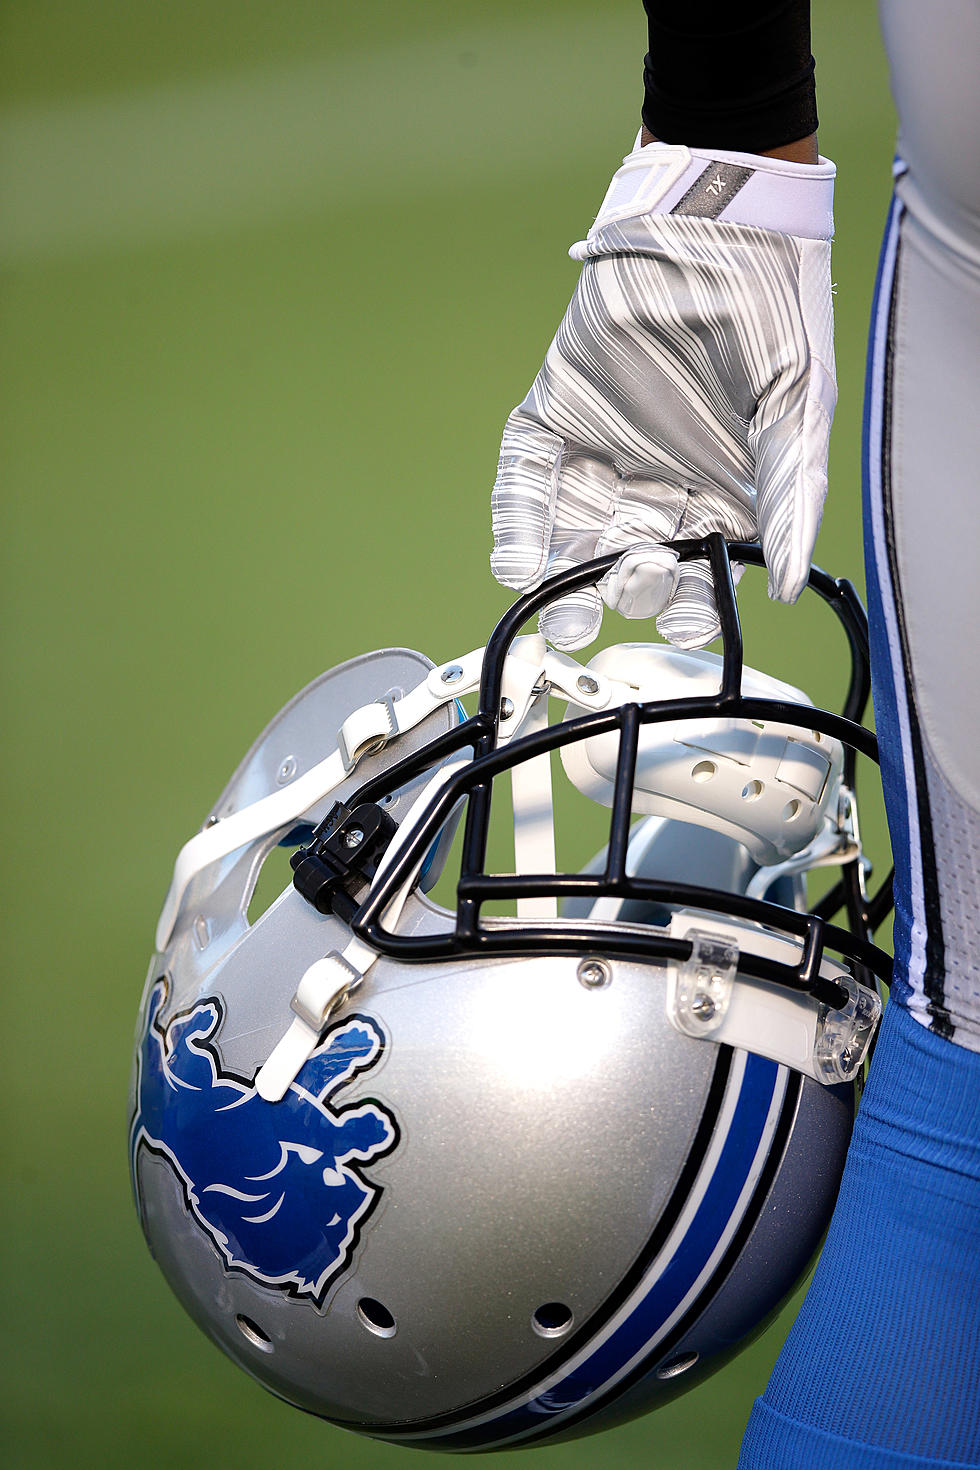 New Survey Says Lions Fans Are The Second Most Dateable Fans In The NFL